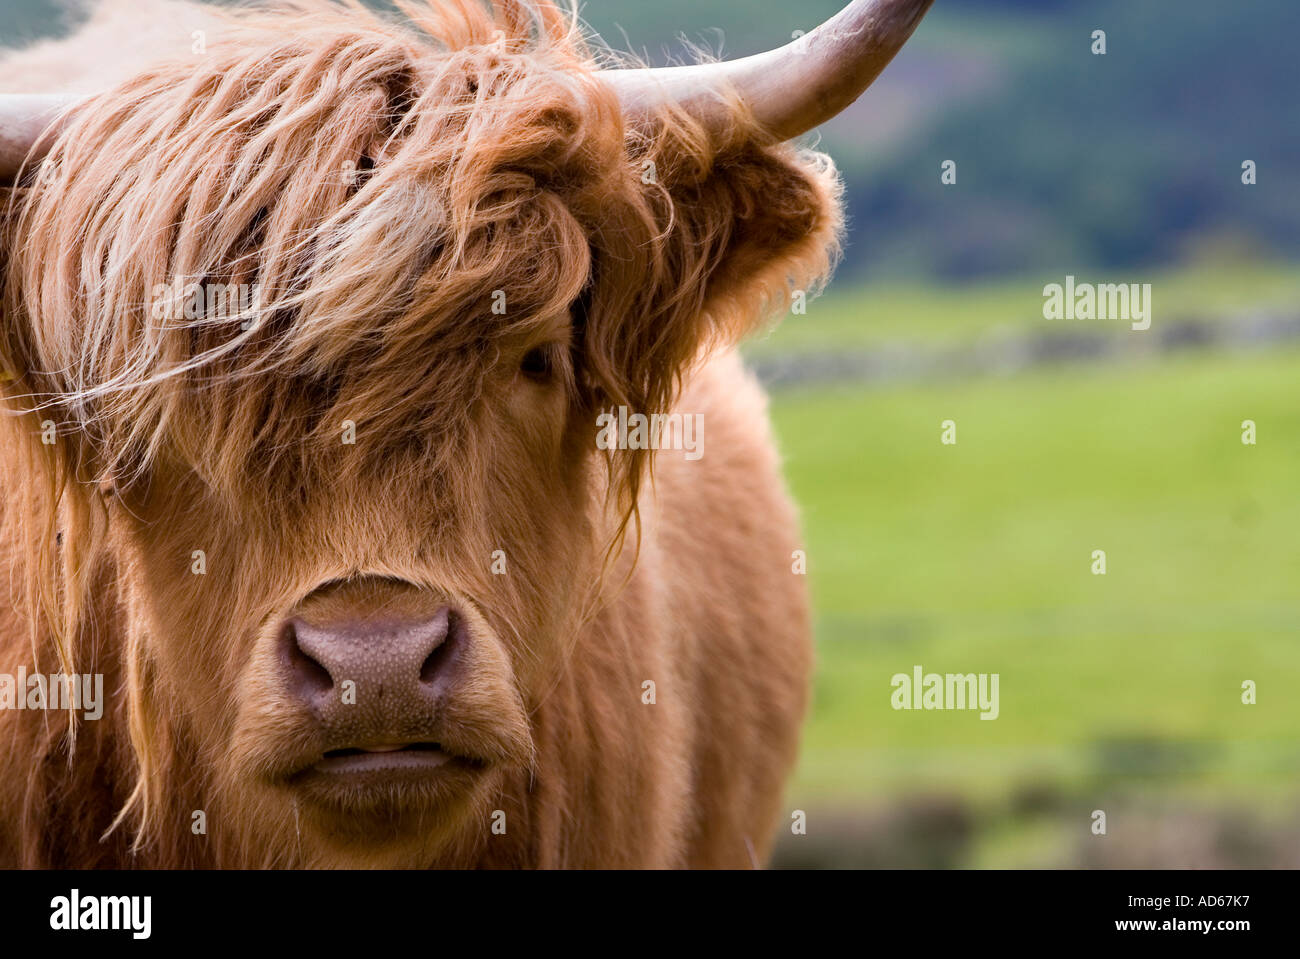 Bos taurus. Highland cow in a field in Scotland Stock Photo